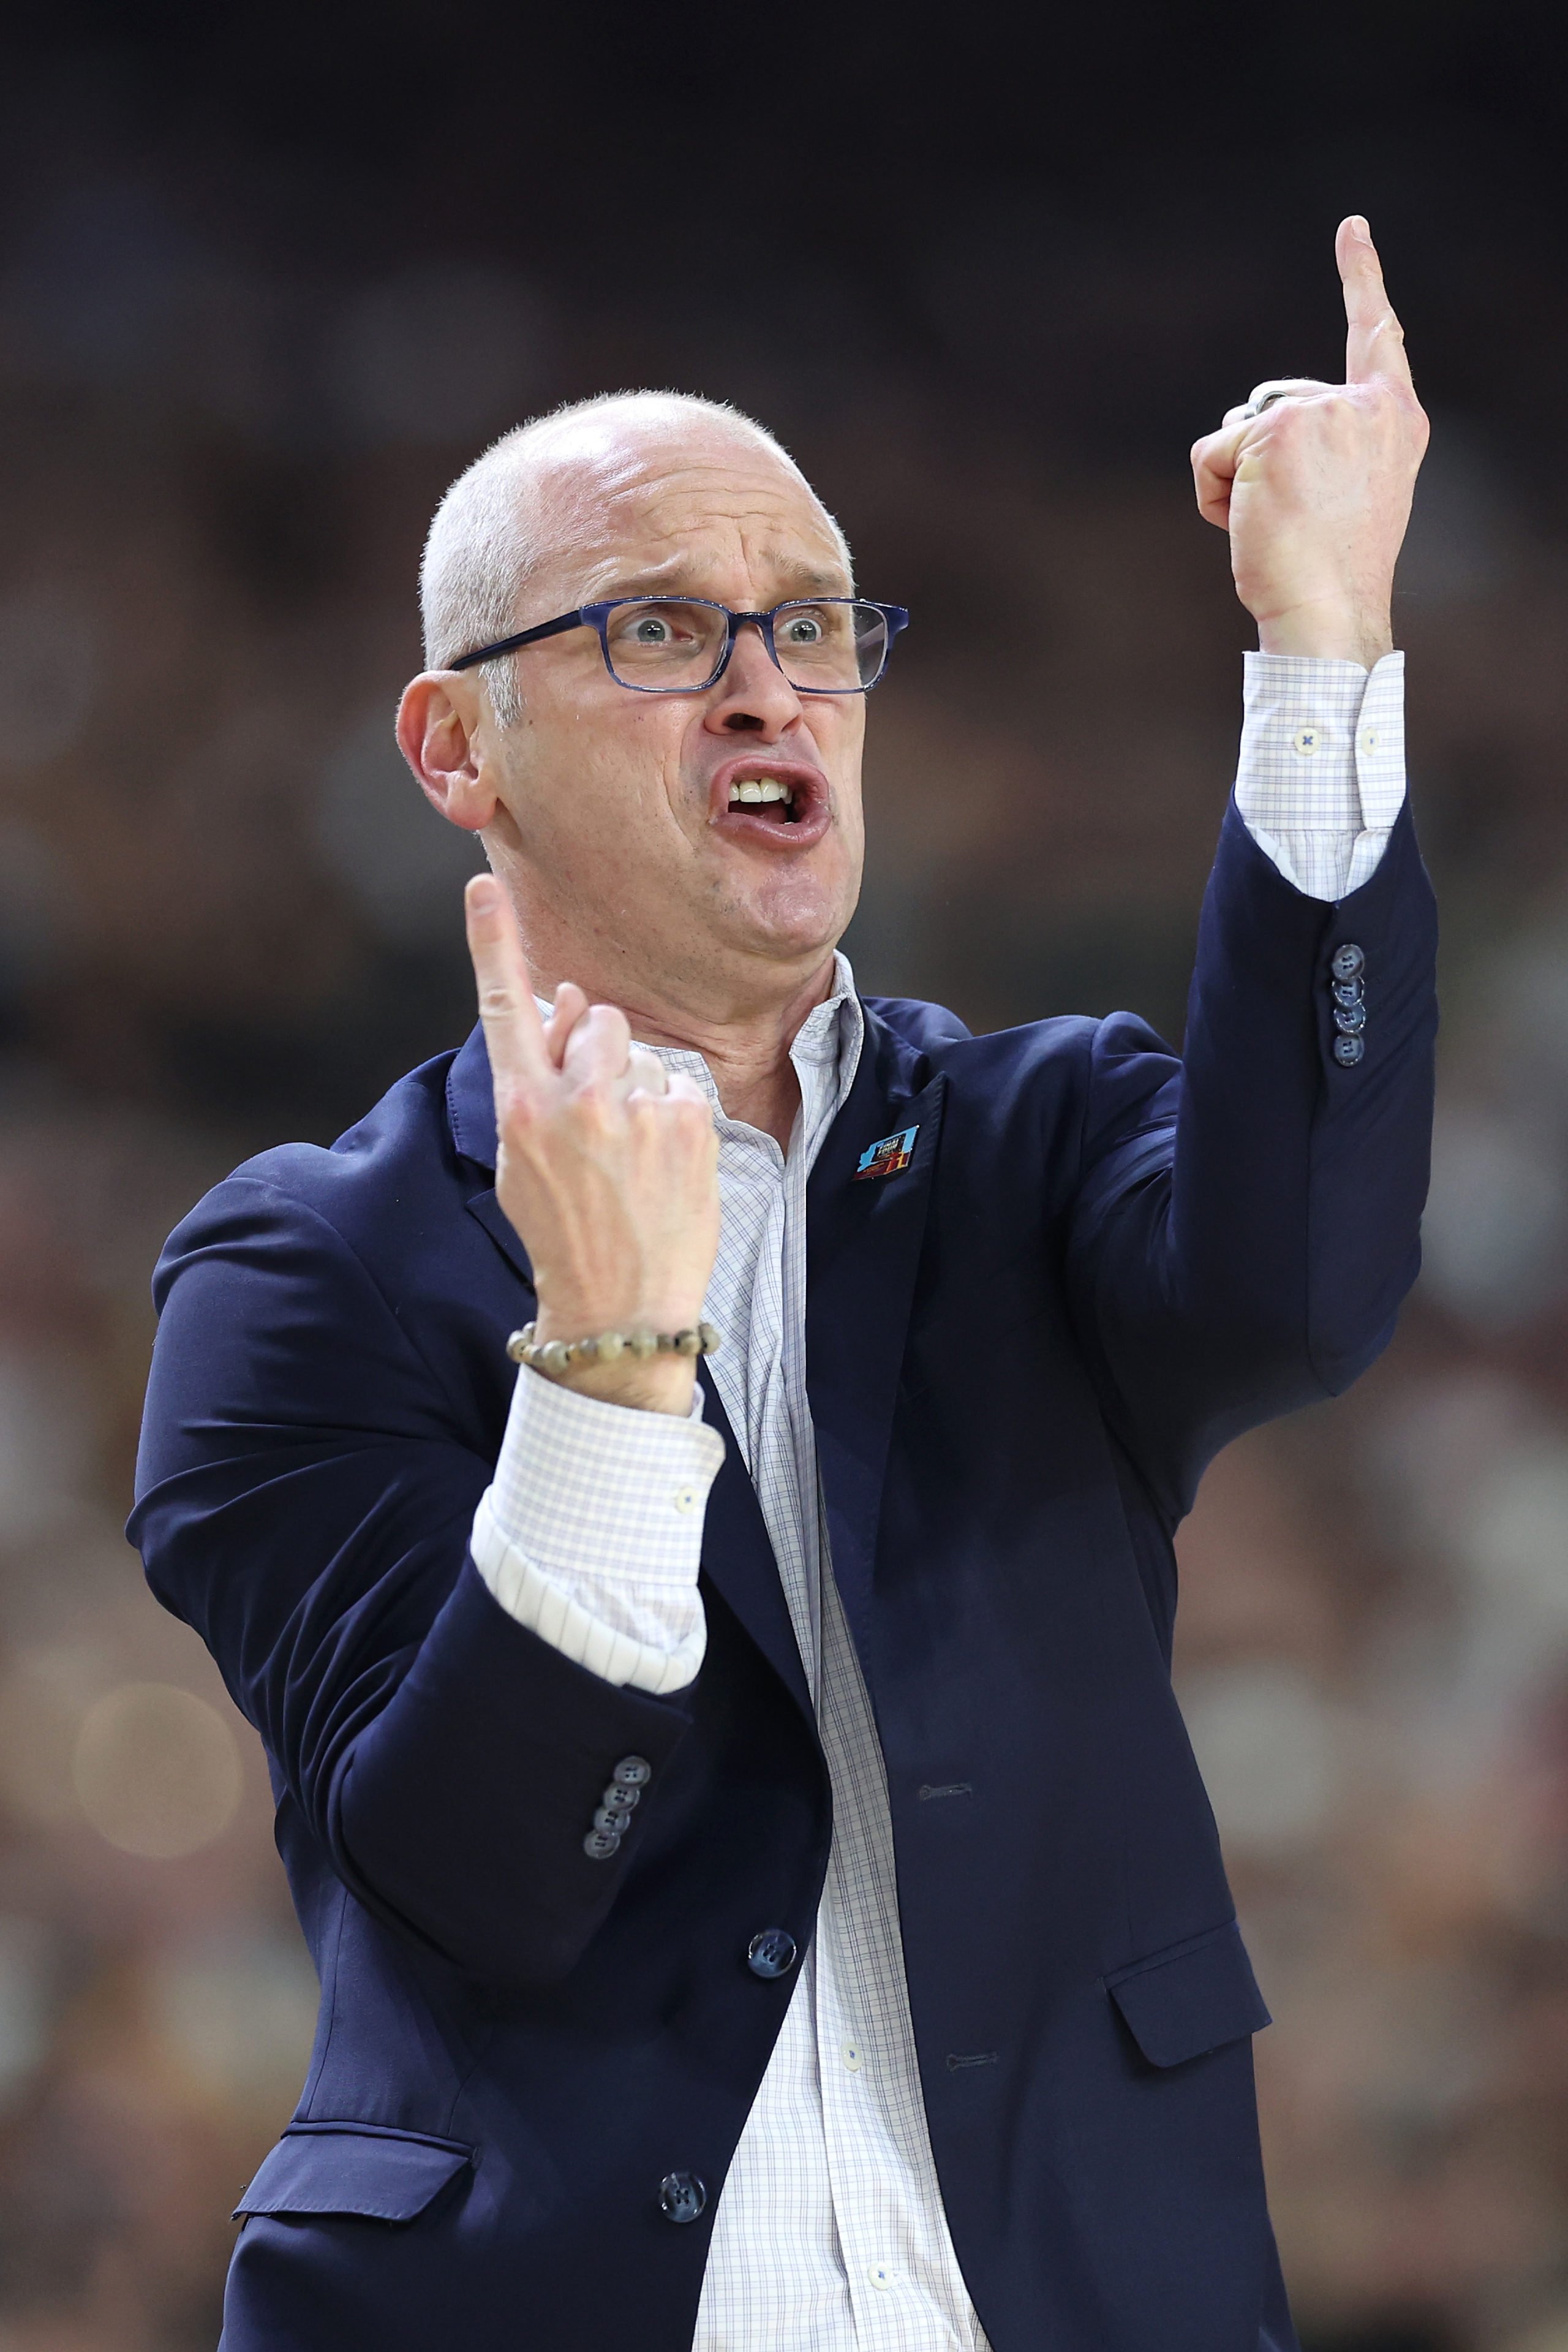 GLENDALE, ARIZONA - APRIL 08: Head coach Dan Hurley of the Connecticut Huskies calls out instructions in the first half against the Purdue Boilermakers during the NCAA Men's Basketball Tournament National Championship game at State Farm Stadium on April 08, 2024 in Glendale, Arizona. Christian Petersen/Getty Images